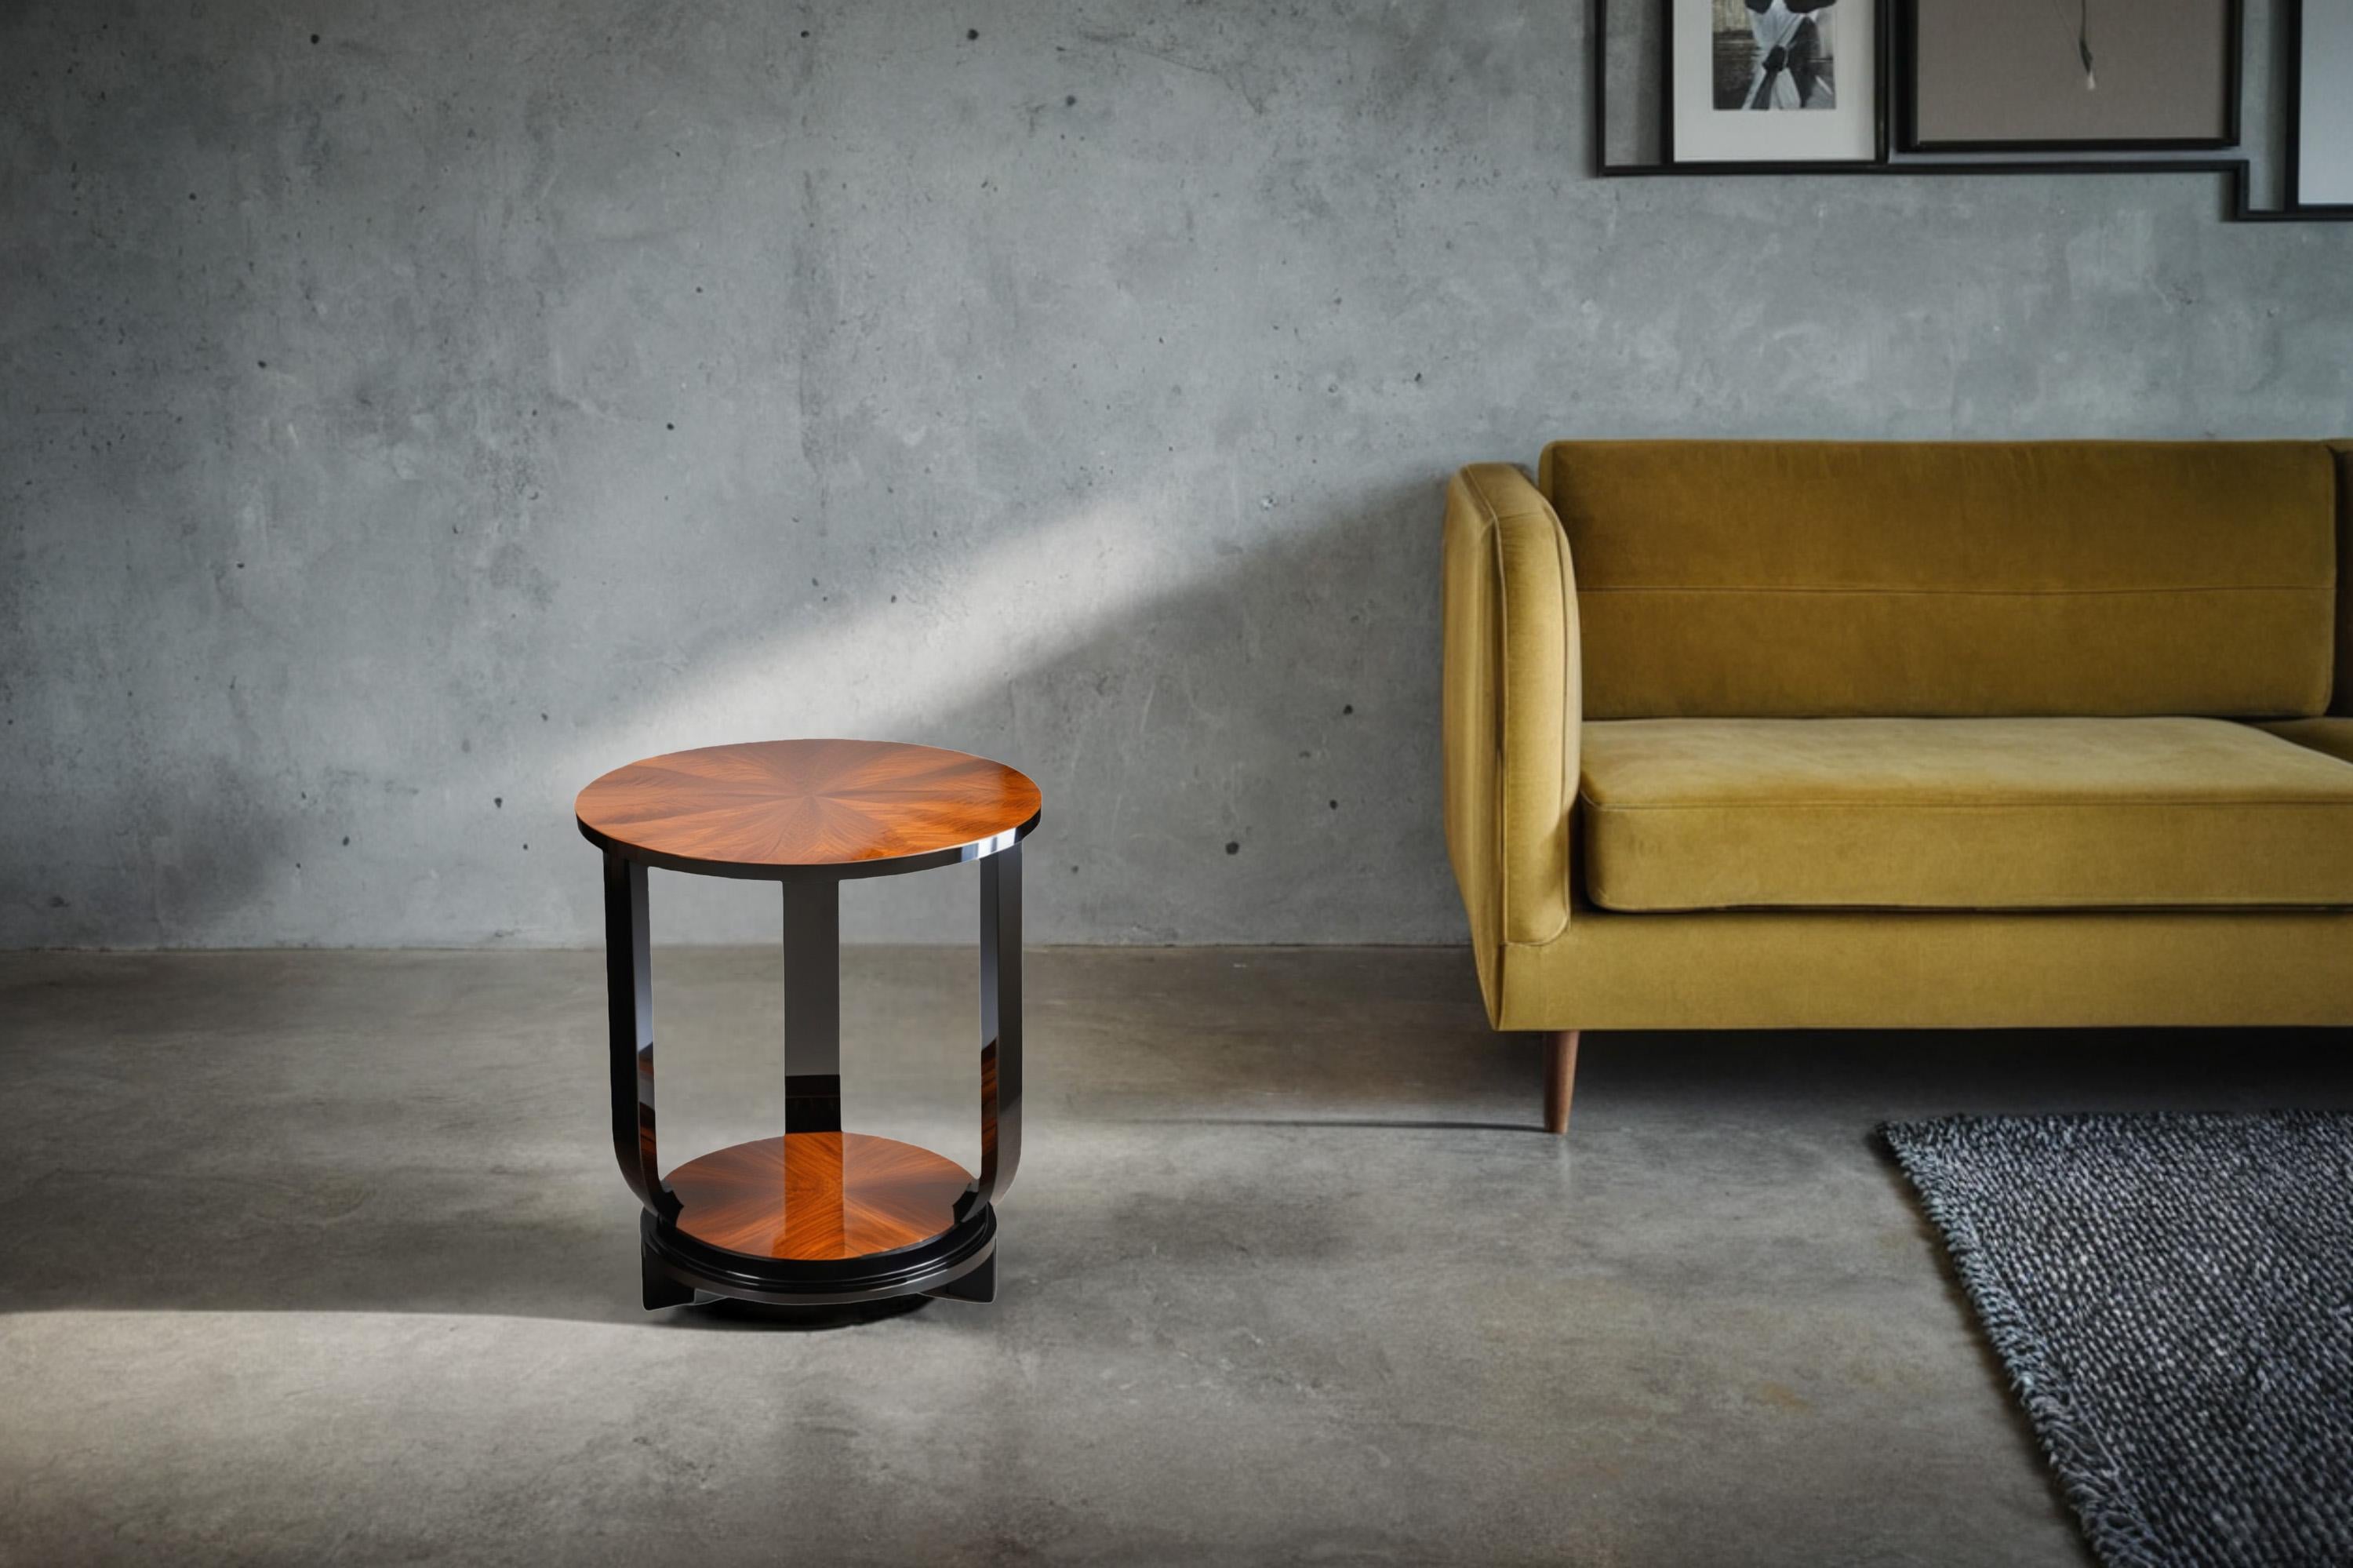 Discover the sophisticated elegance of Art Deco with our exquisite side table! Handcrafted from high-quality Macassar veneer and accented with a frame made from high-gloss black piano lacquer, this table combines timeless aesthetics with modern